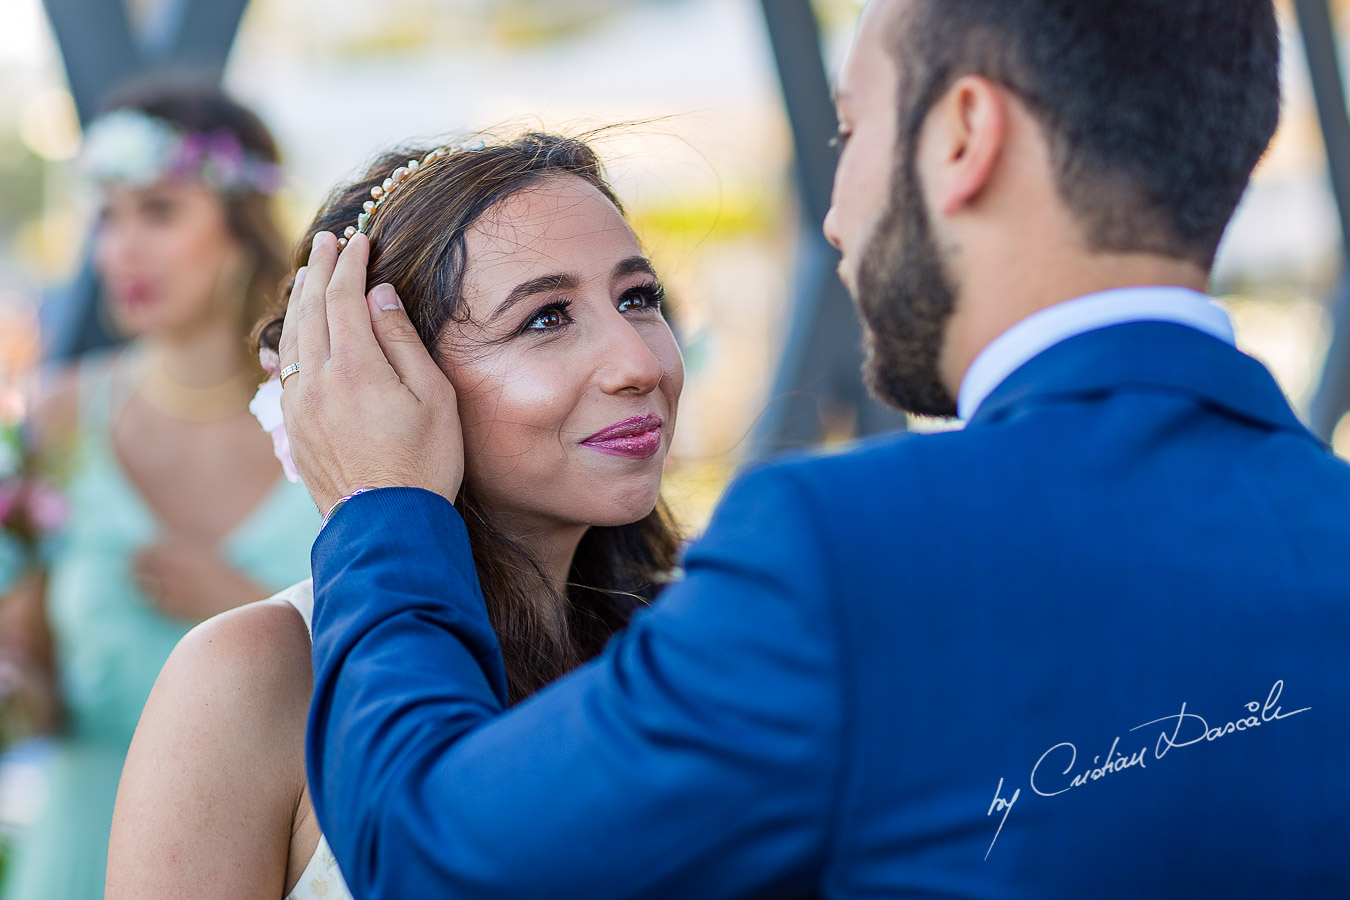 Unique gentle moments with the bride and groom during the ceremony, as part of an Exclusive Wedding photography at Grand Resort Limassol, captured by Cyprus Wedding Photographer Cristian Dascalu.